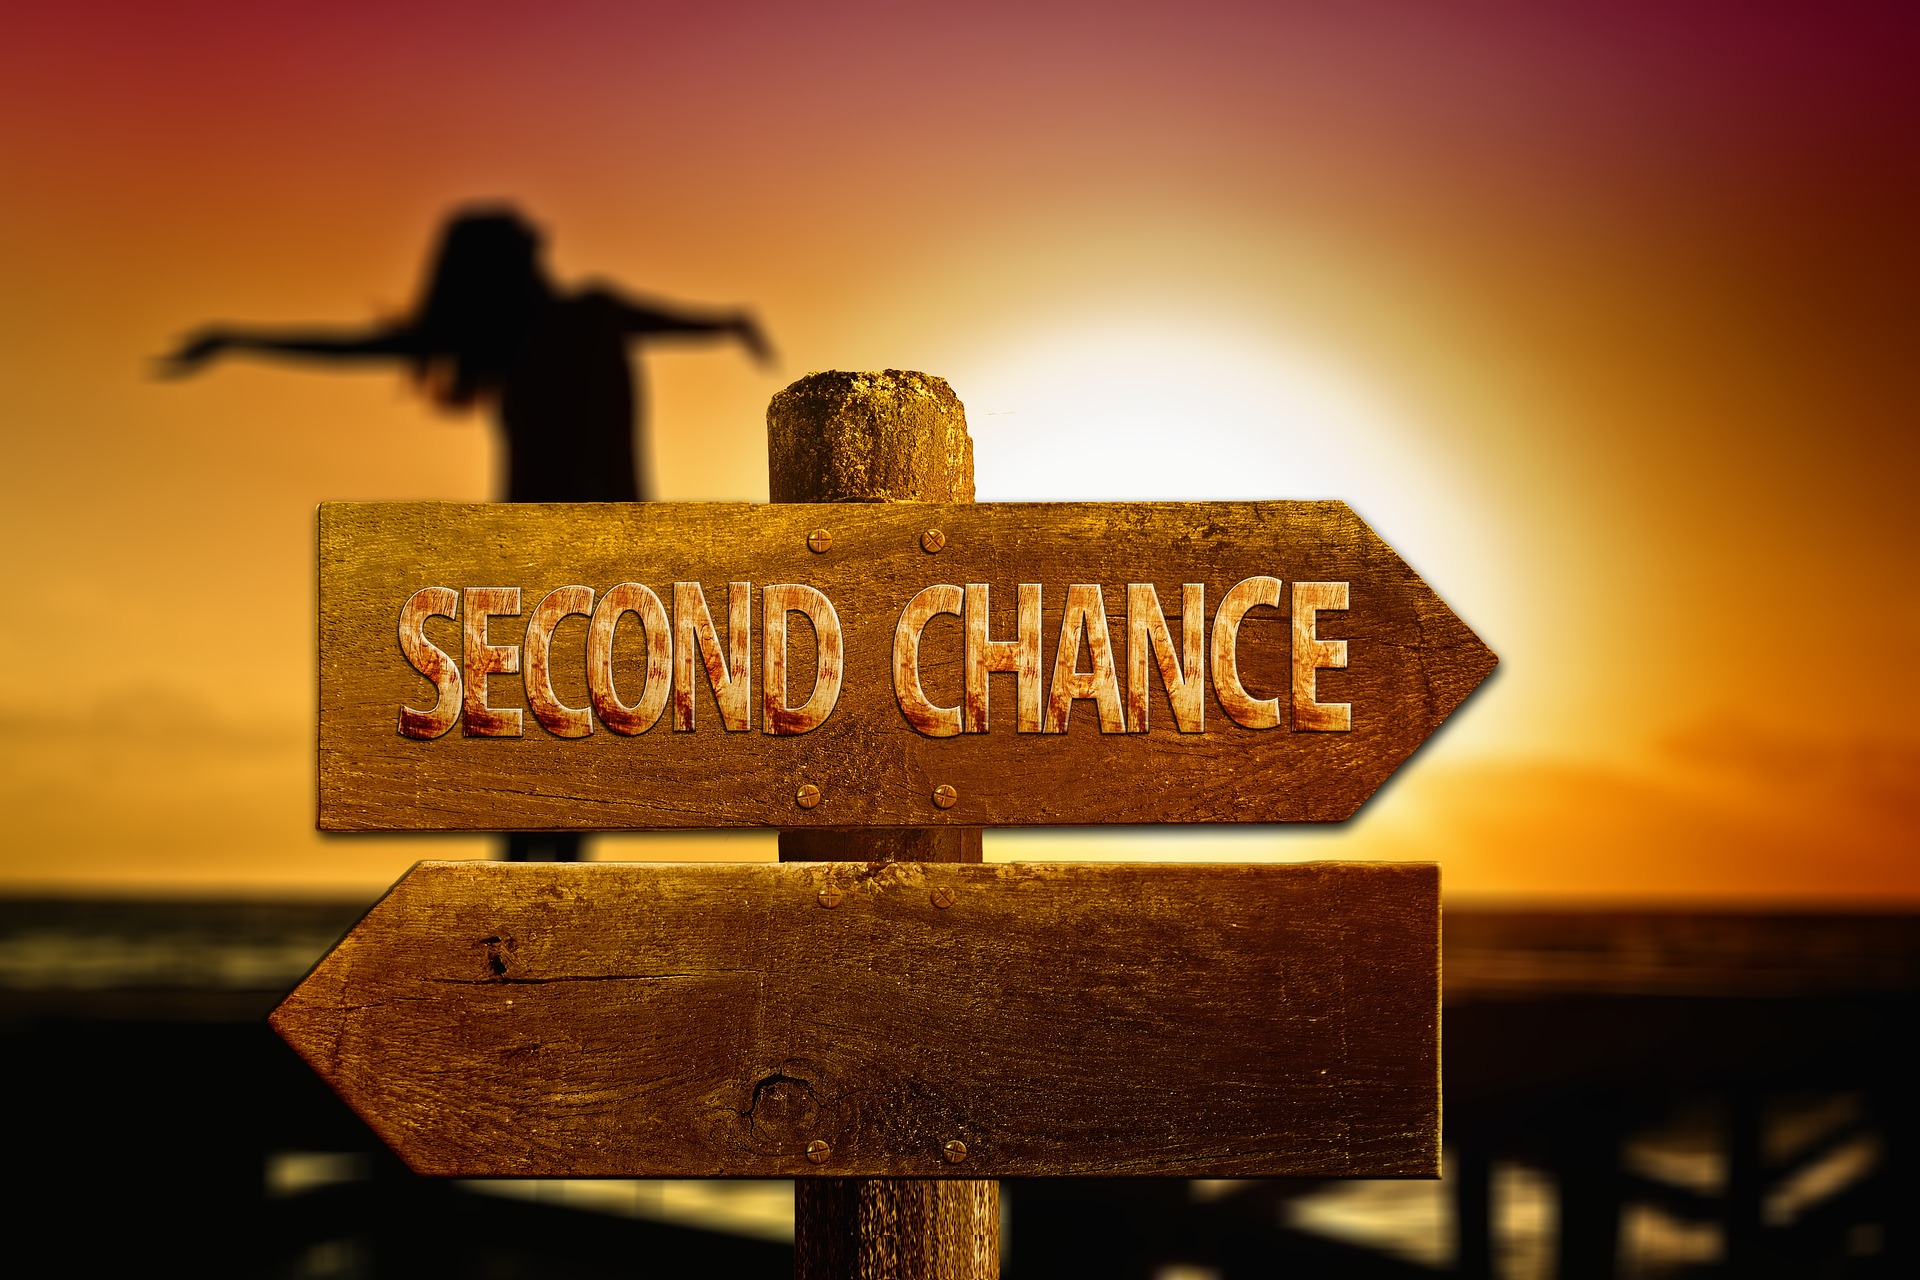 directional sign pointing to second chance